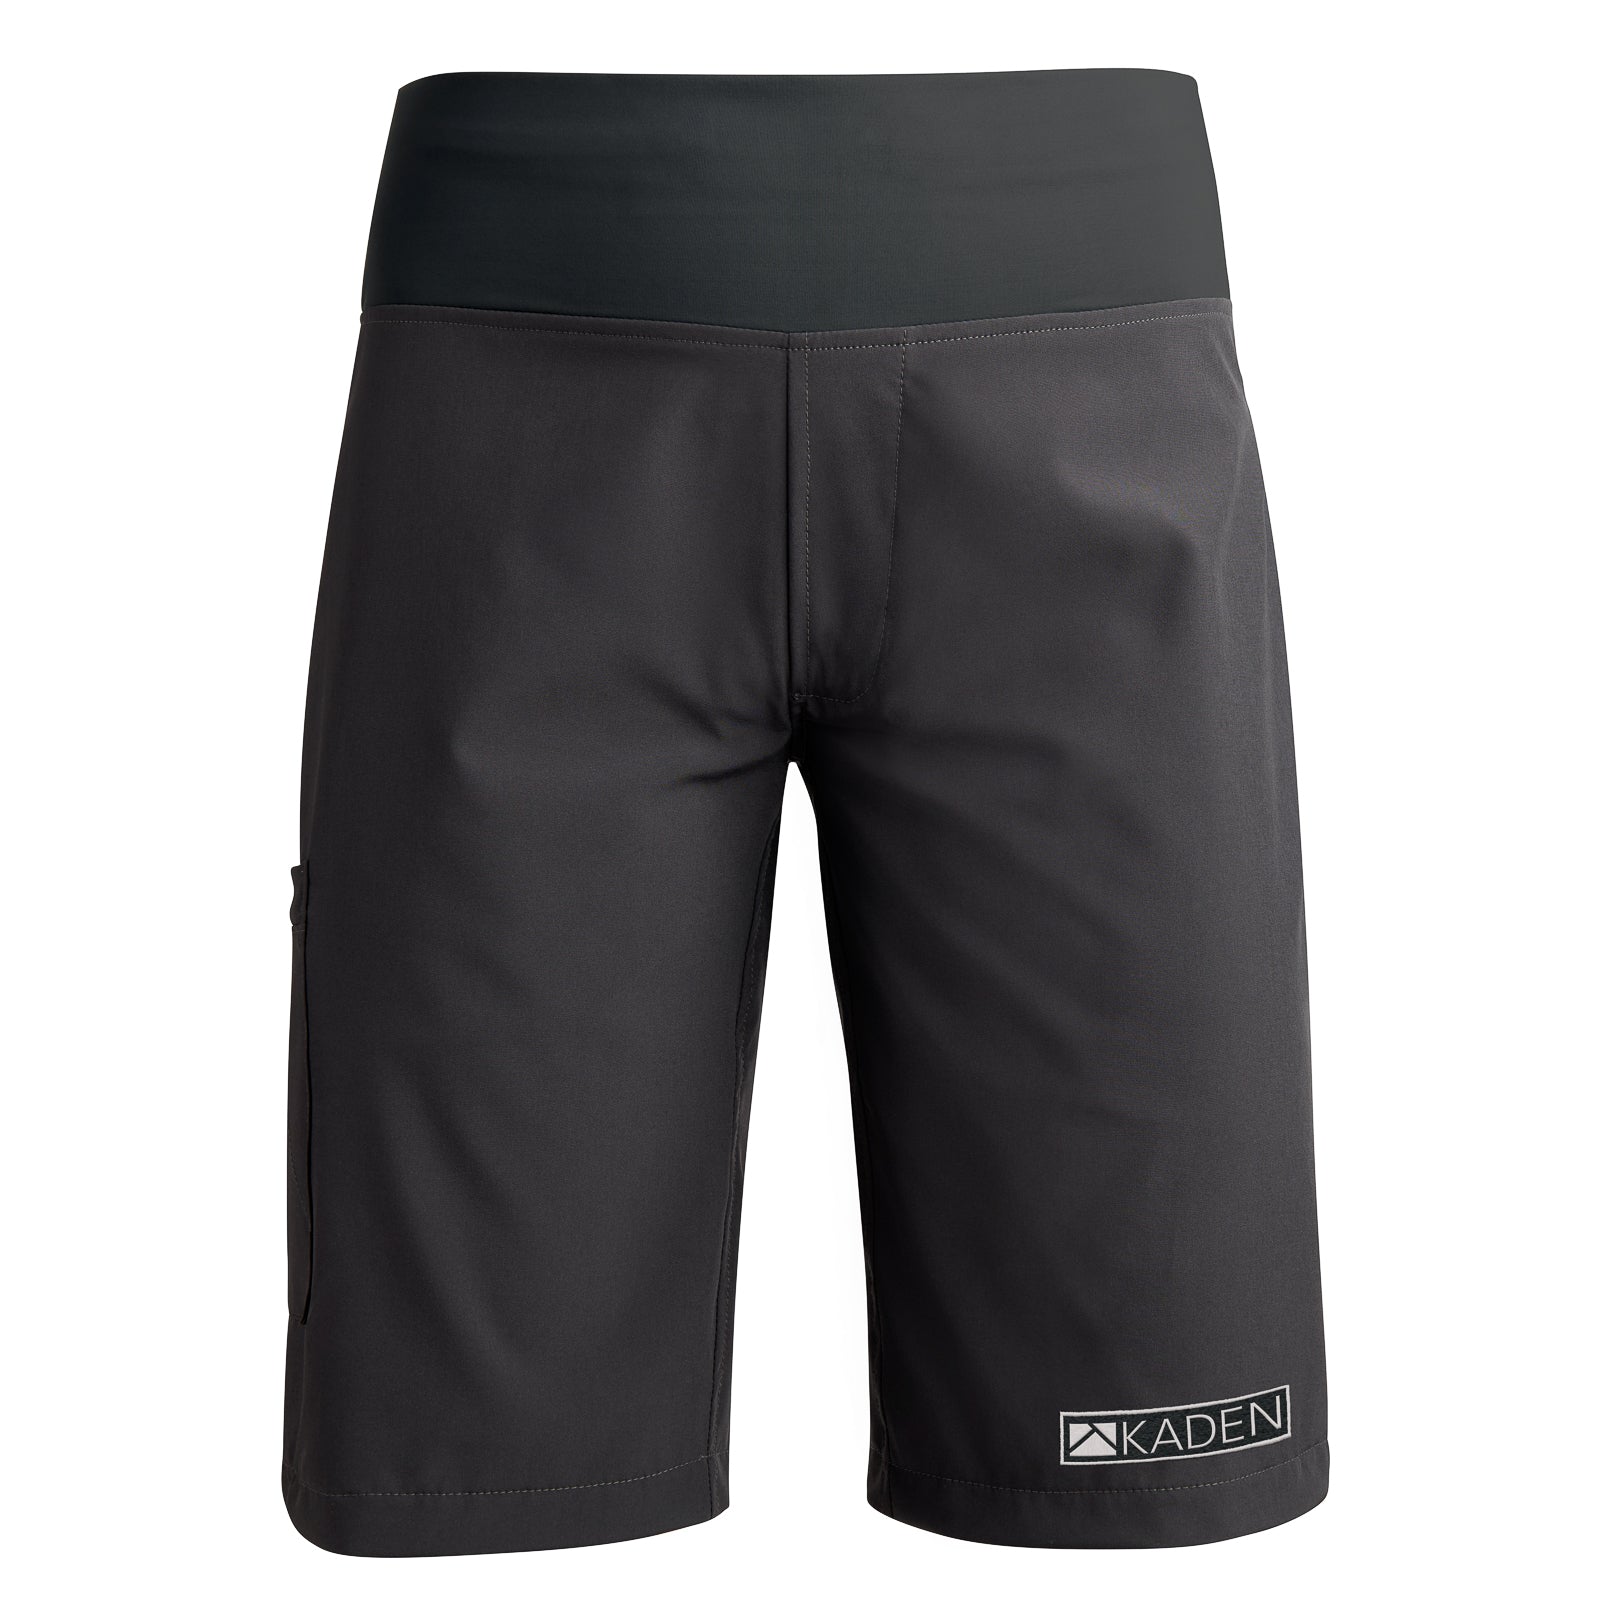 First Line of Mountain Bike Shorts Unveiled From Kaden Apparel - Pinner Short Front